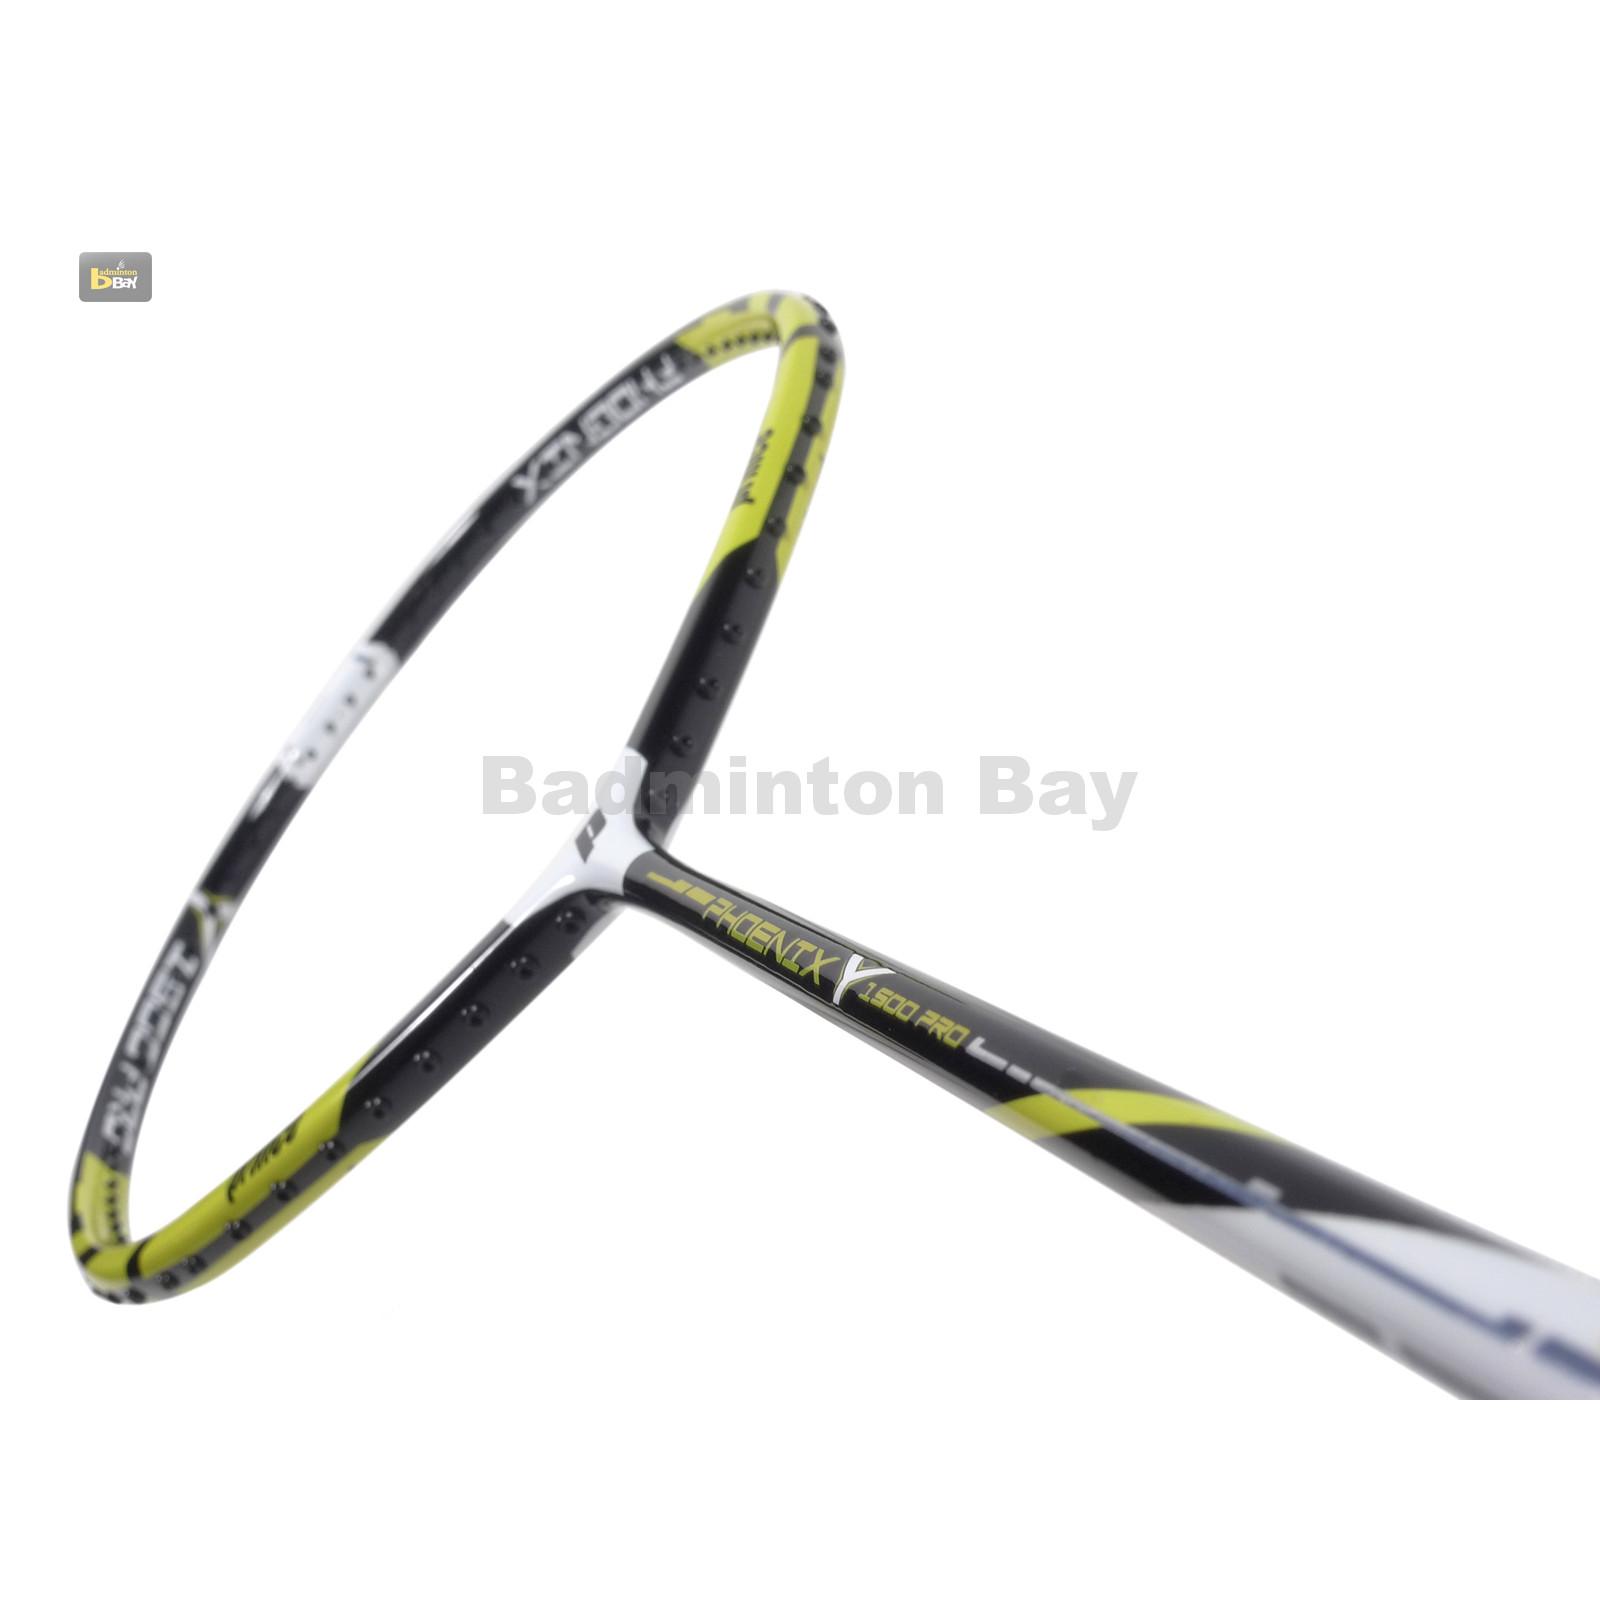 6 Shuttles Prince PRO Nano 75 Graphite Badminton Racket Series with Full Protective Cover Various Options